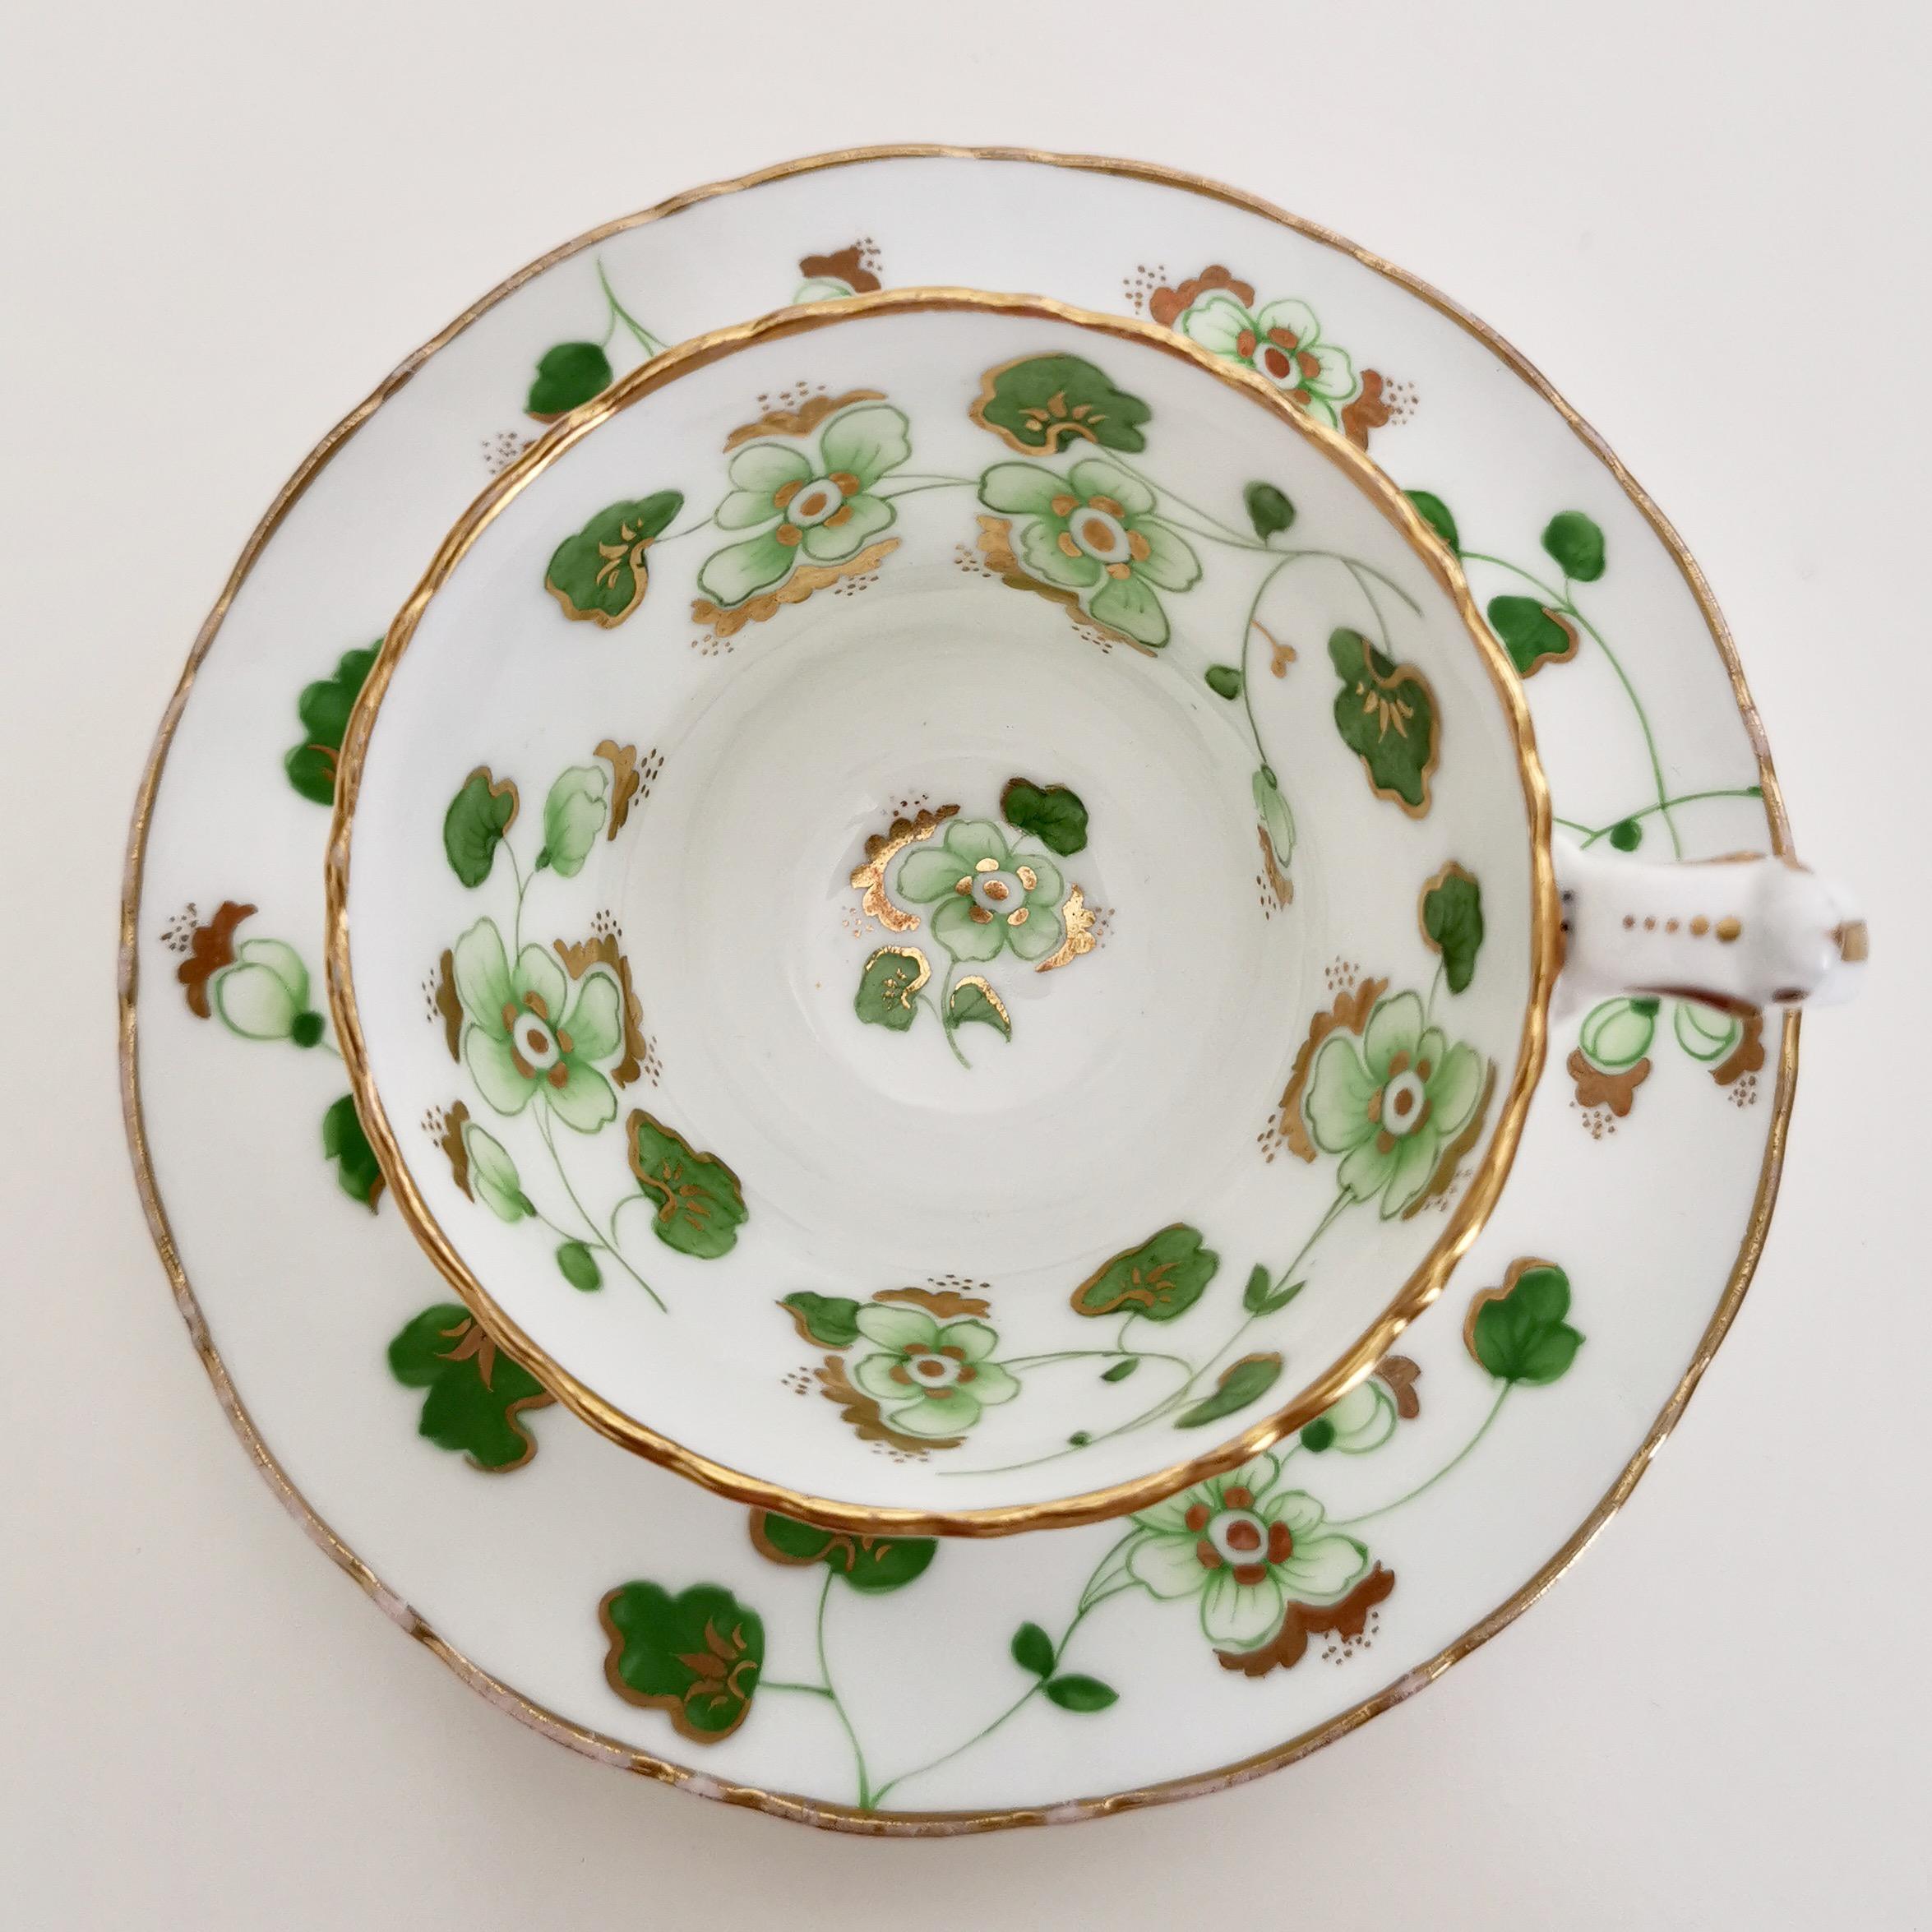 Early Victorian Ridgway Porcelain Coffee Cup, Green Floral Design, Victorian, circa 1840